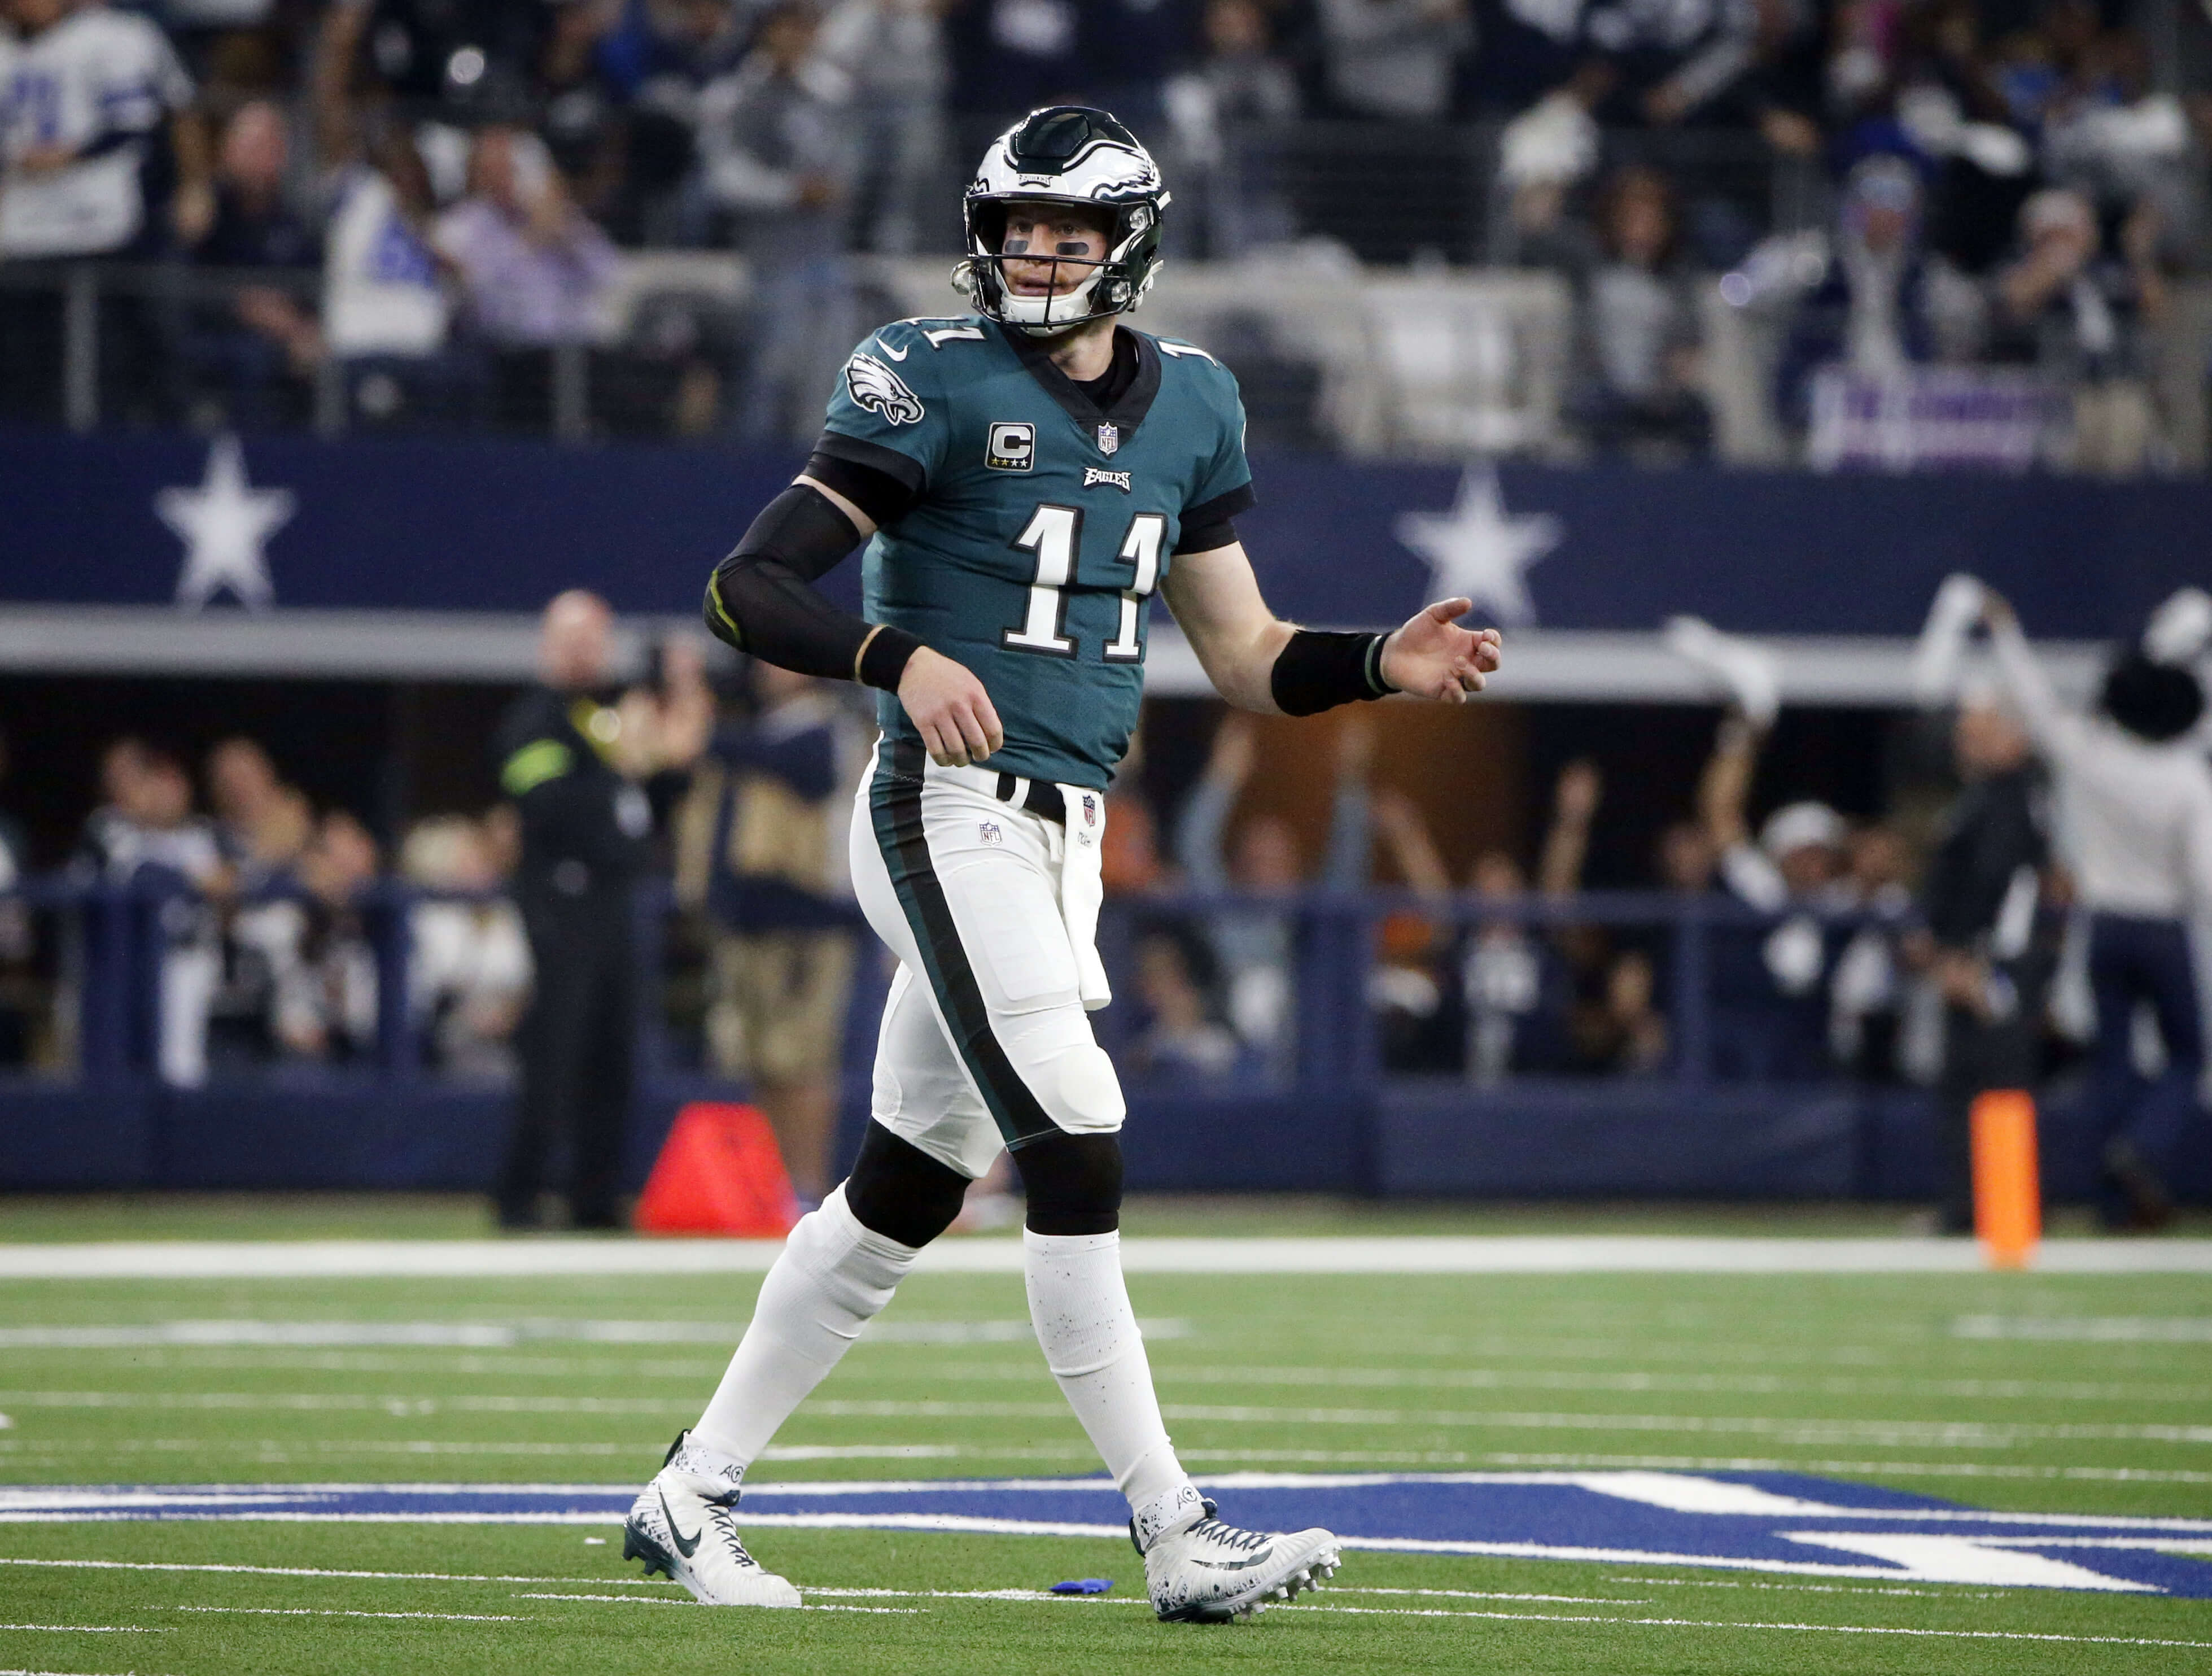 AP Sources: Carson Wentz hasn't been ruled out for next game.